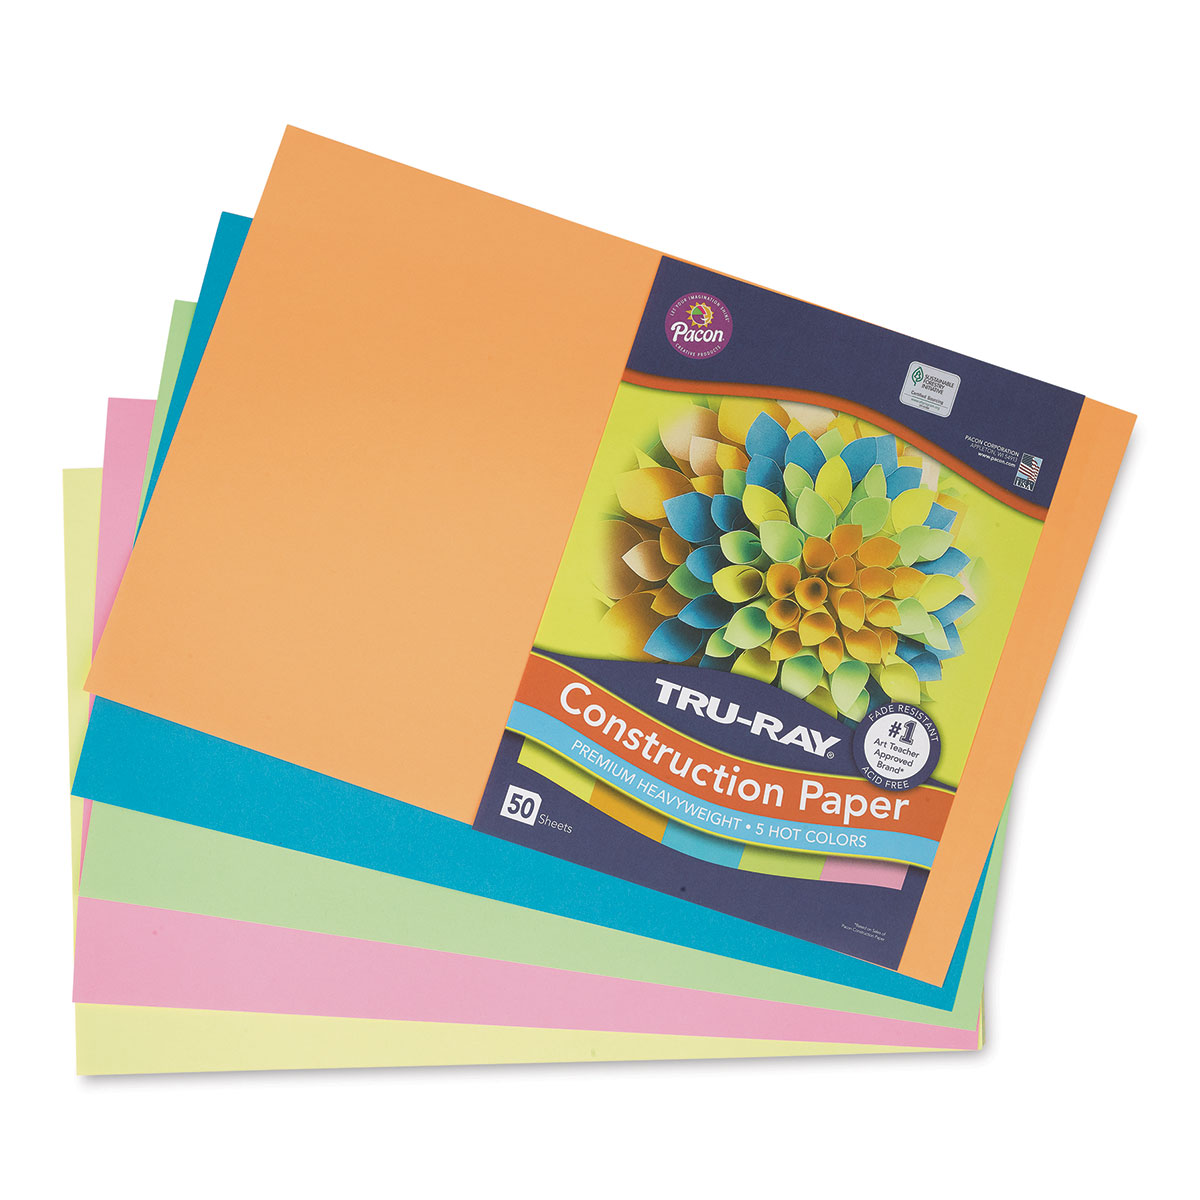 Pacon Tru-Ray Construction Paper - 12 x 18, Assorted Hot Colors, 50 Sheets